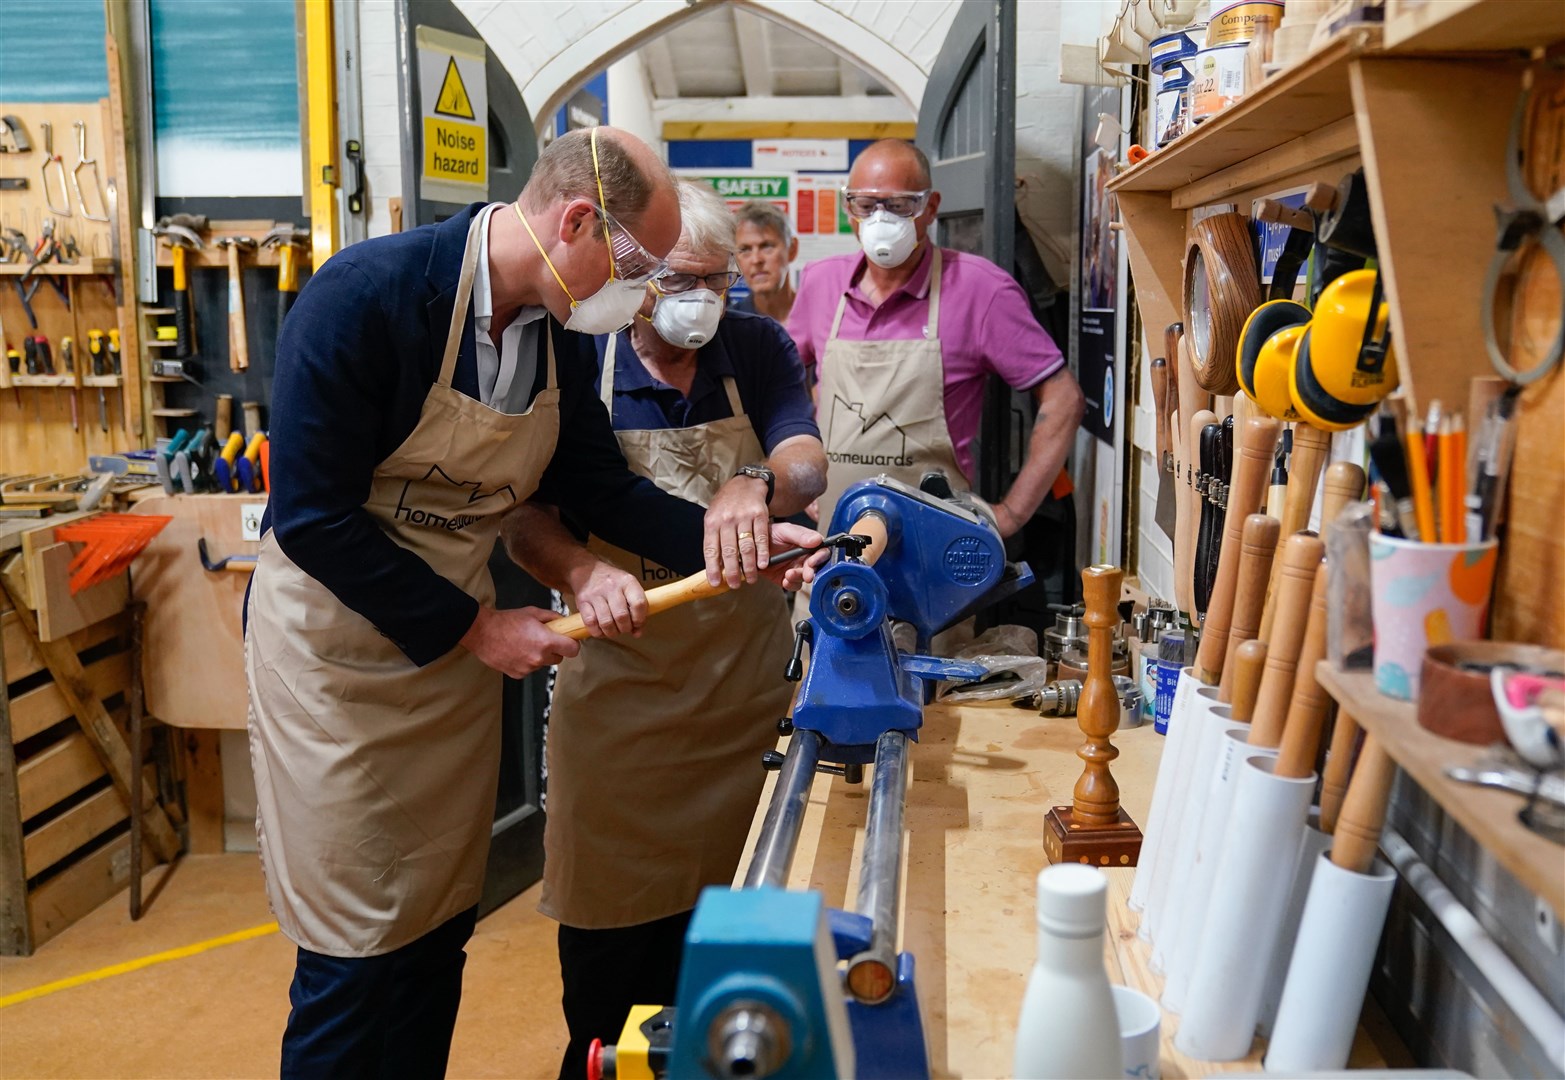 The Prince of Wales uses a lathe during a visit to Faithworks Carpentry Workshop (Andrew Matthews/PA)